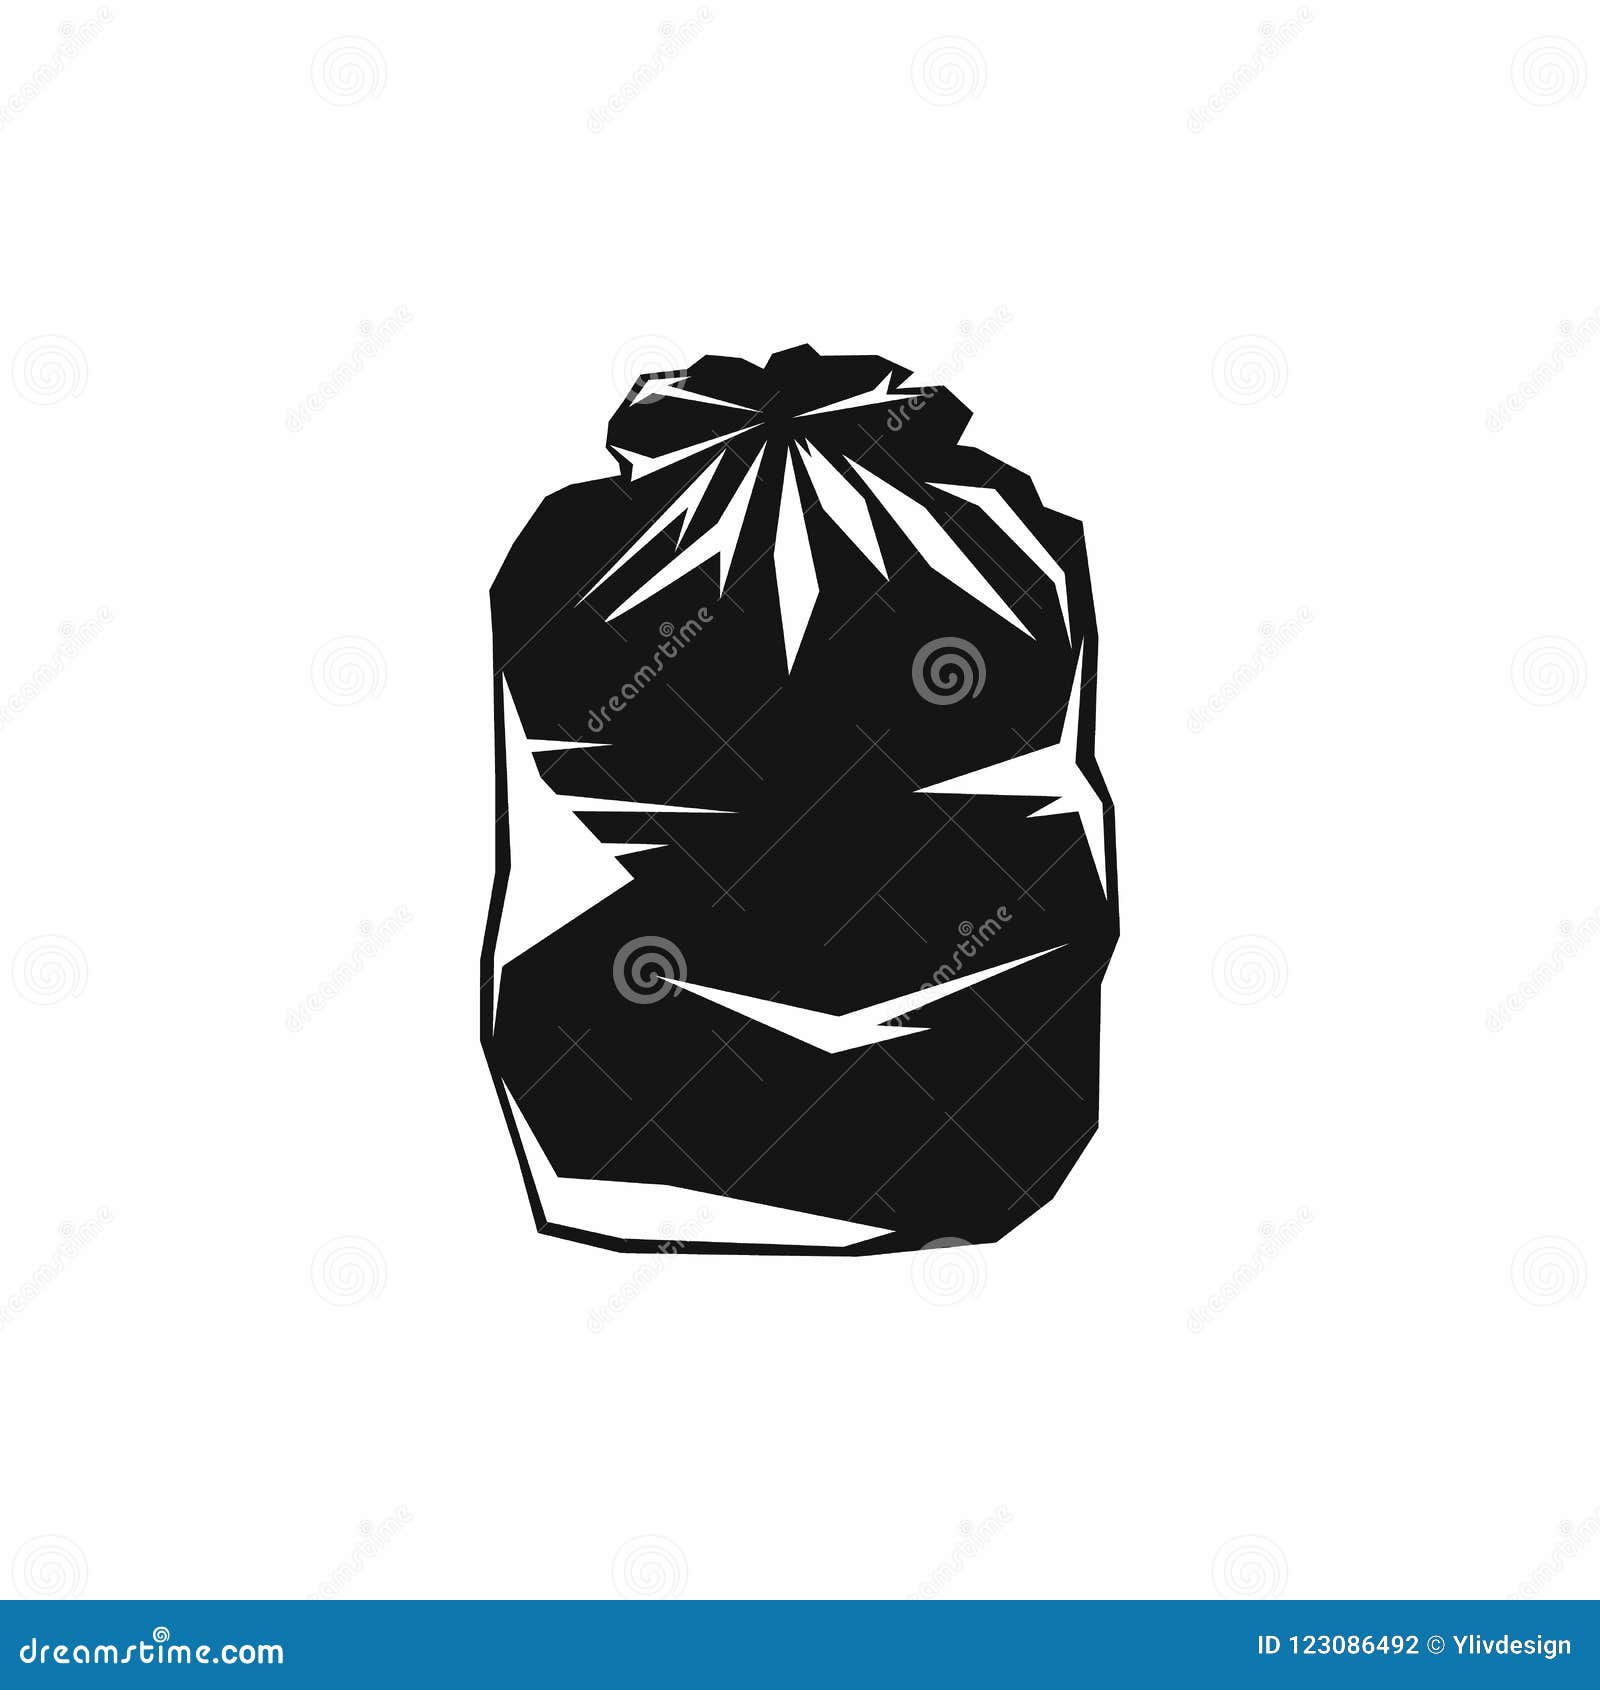 9+ Thousand Cartoon Rubbish Bag Royalty-Free Images, Stock Photos &  Pictures